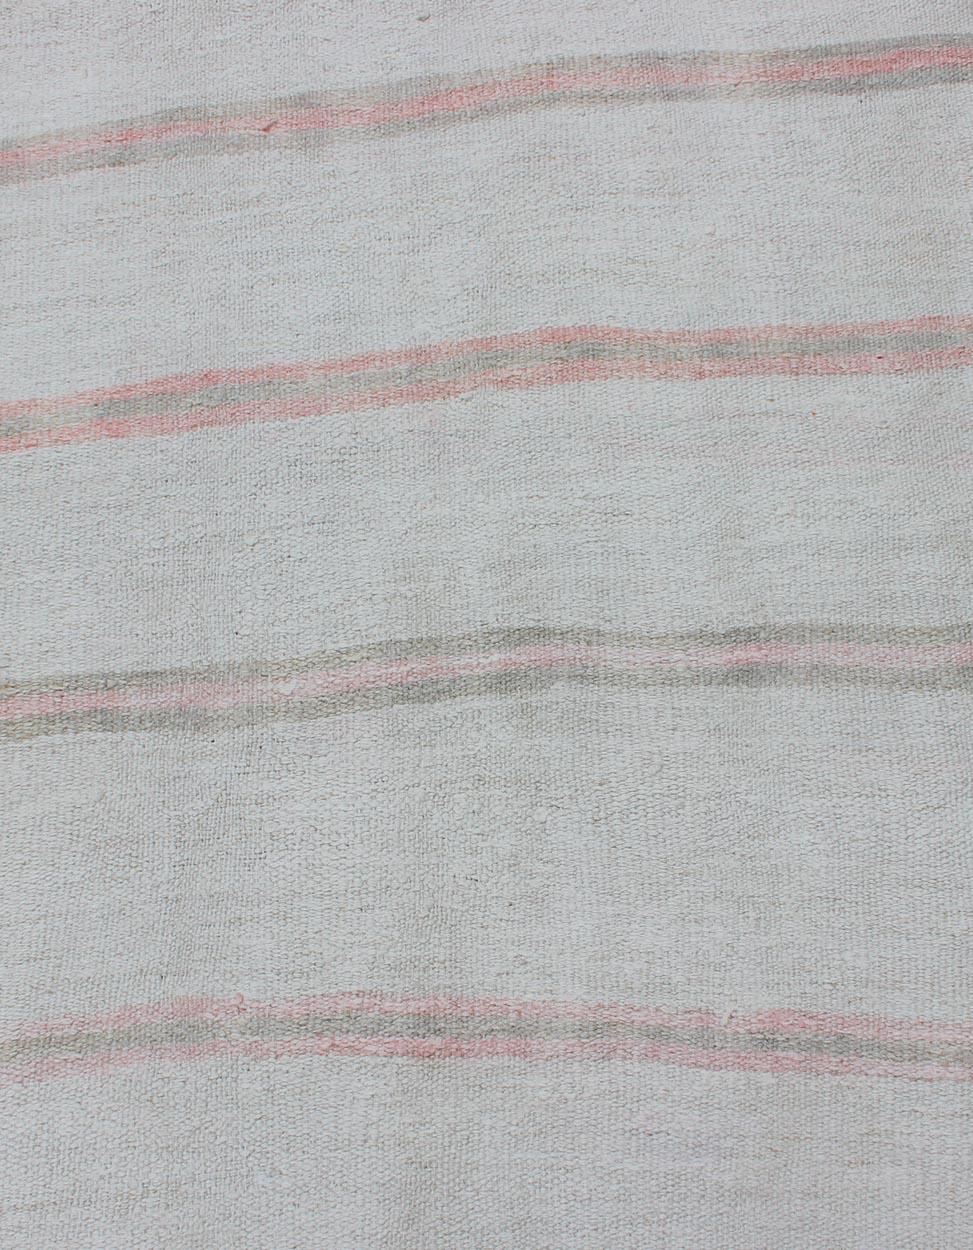 Striped Turkish Vintage Kilim Flat-Weave Rug in Shades of Soft Red and Cream For Sale 2